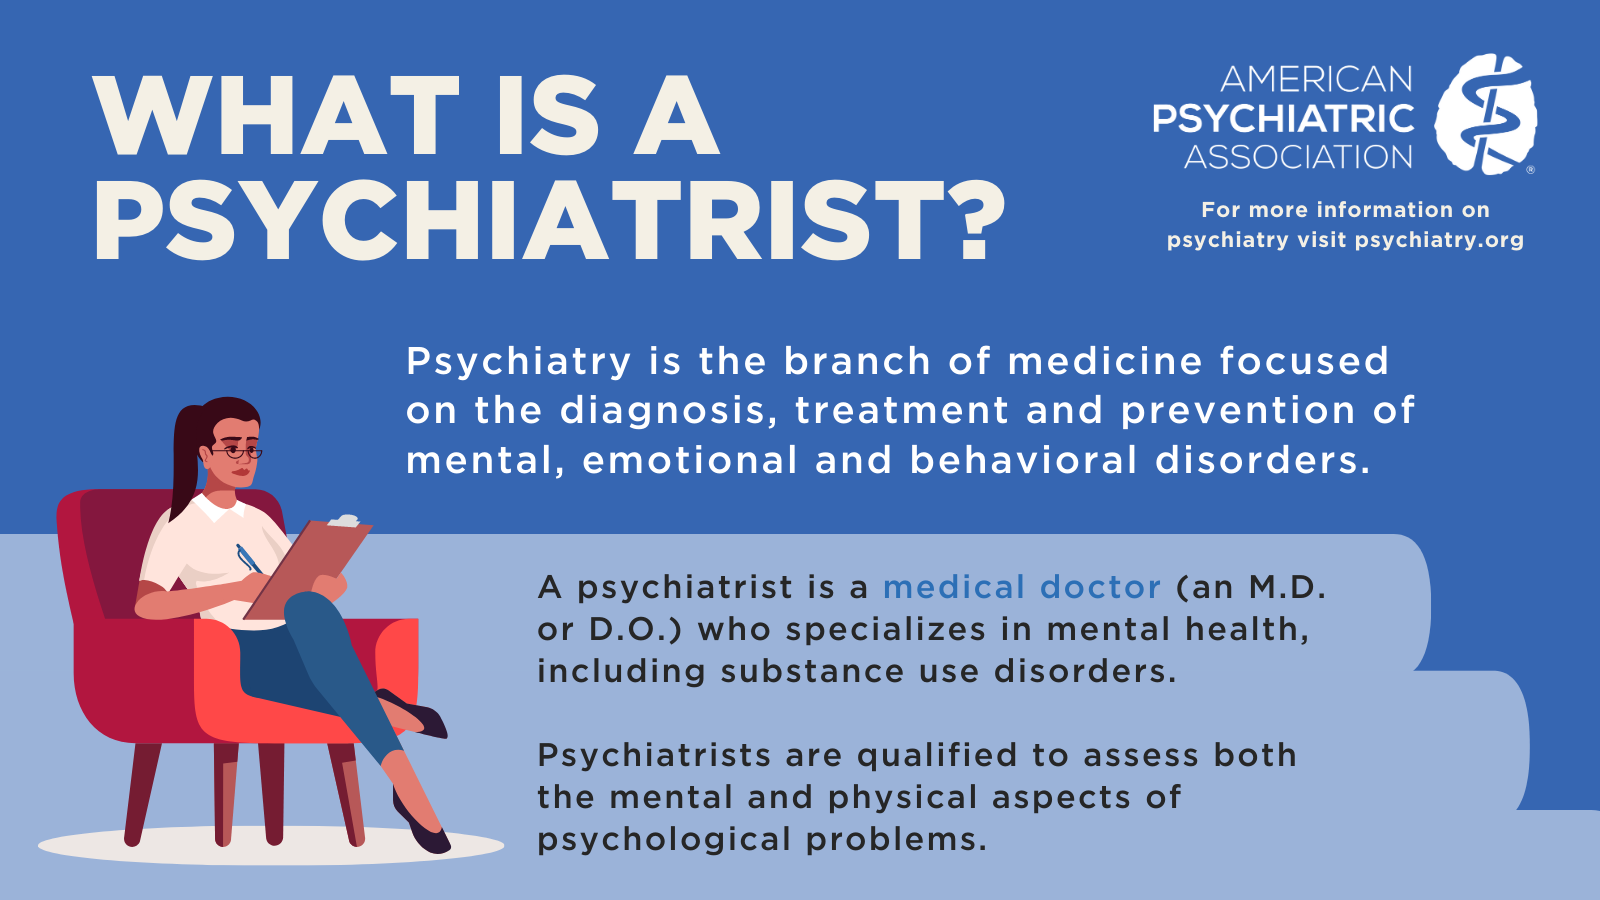 What is a psychiatrist?